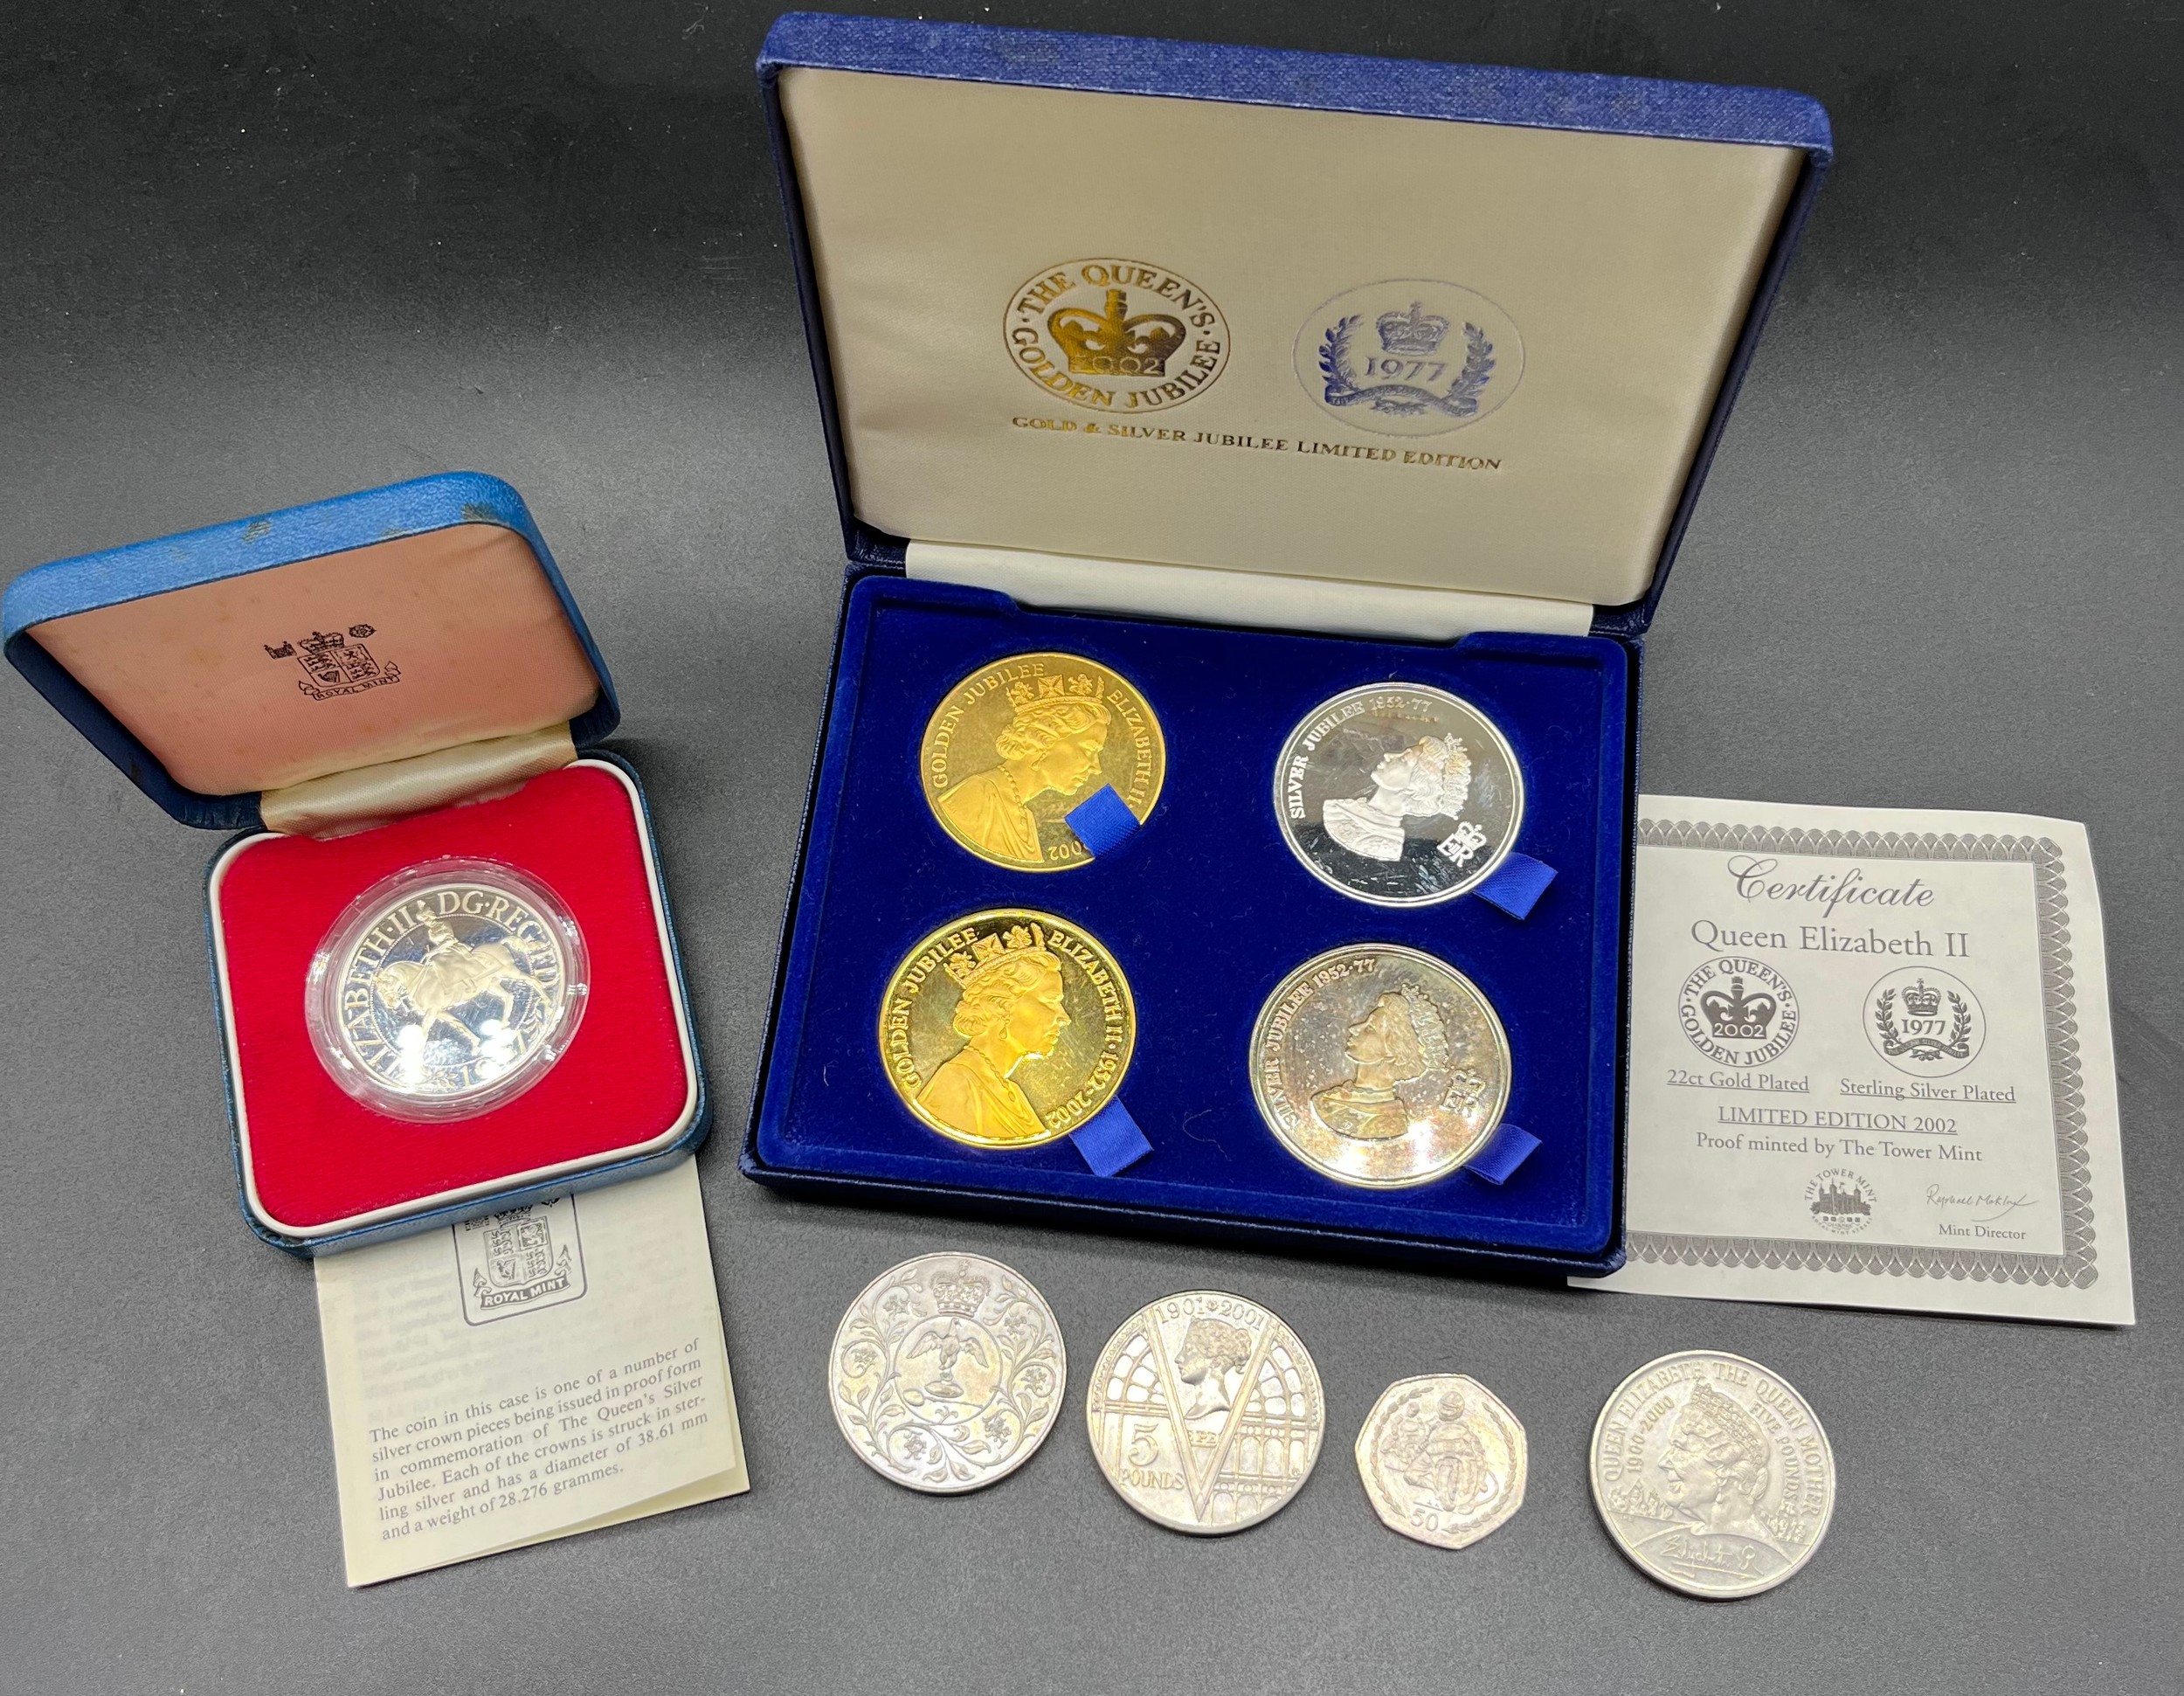 A Boxed Royal Mint Sterling silver crown, Boxed 'The Tower Mint' four piece coin set and four